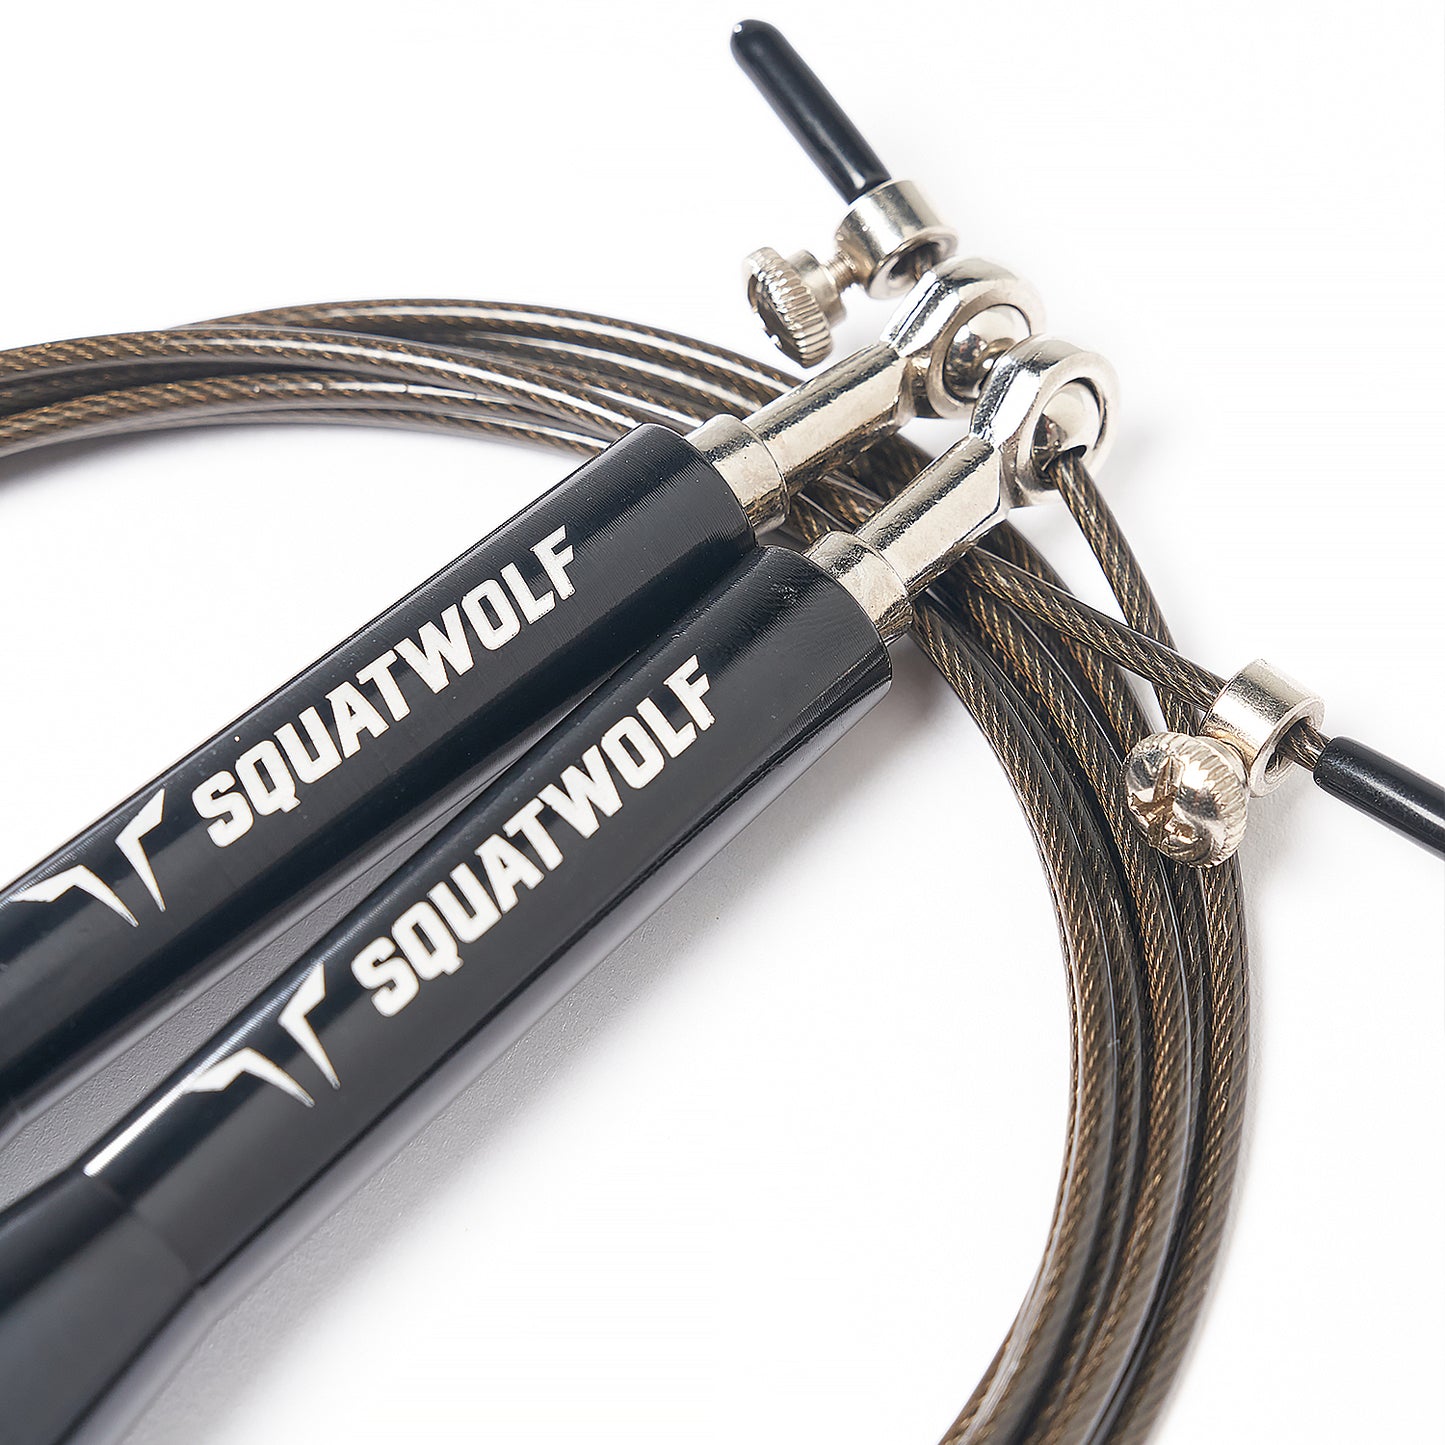 squatwolf-gym-wear-squatwolf-skipping-rope-black-workout